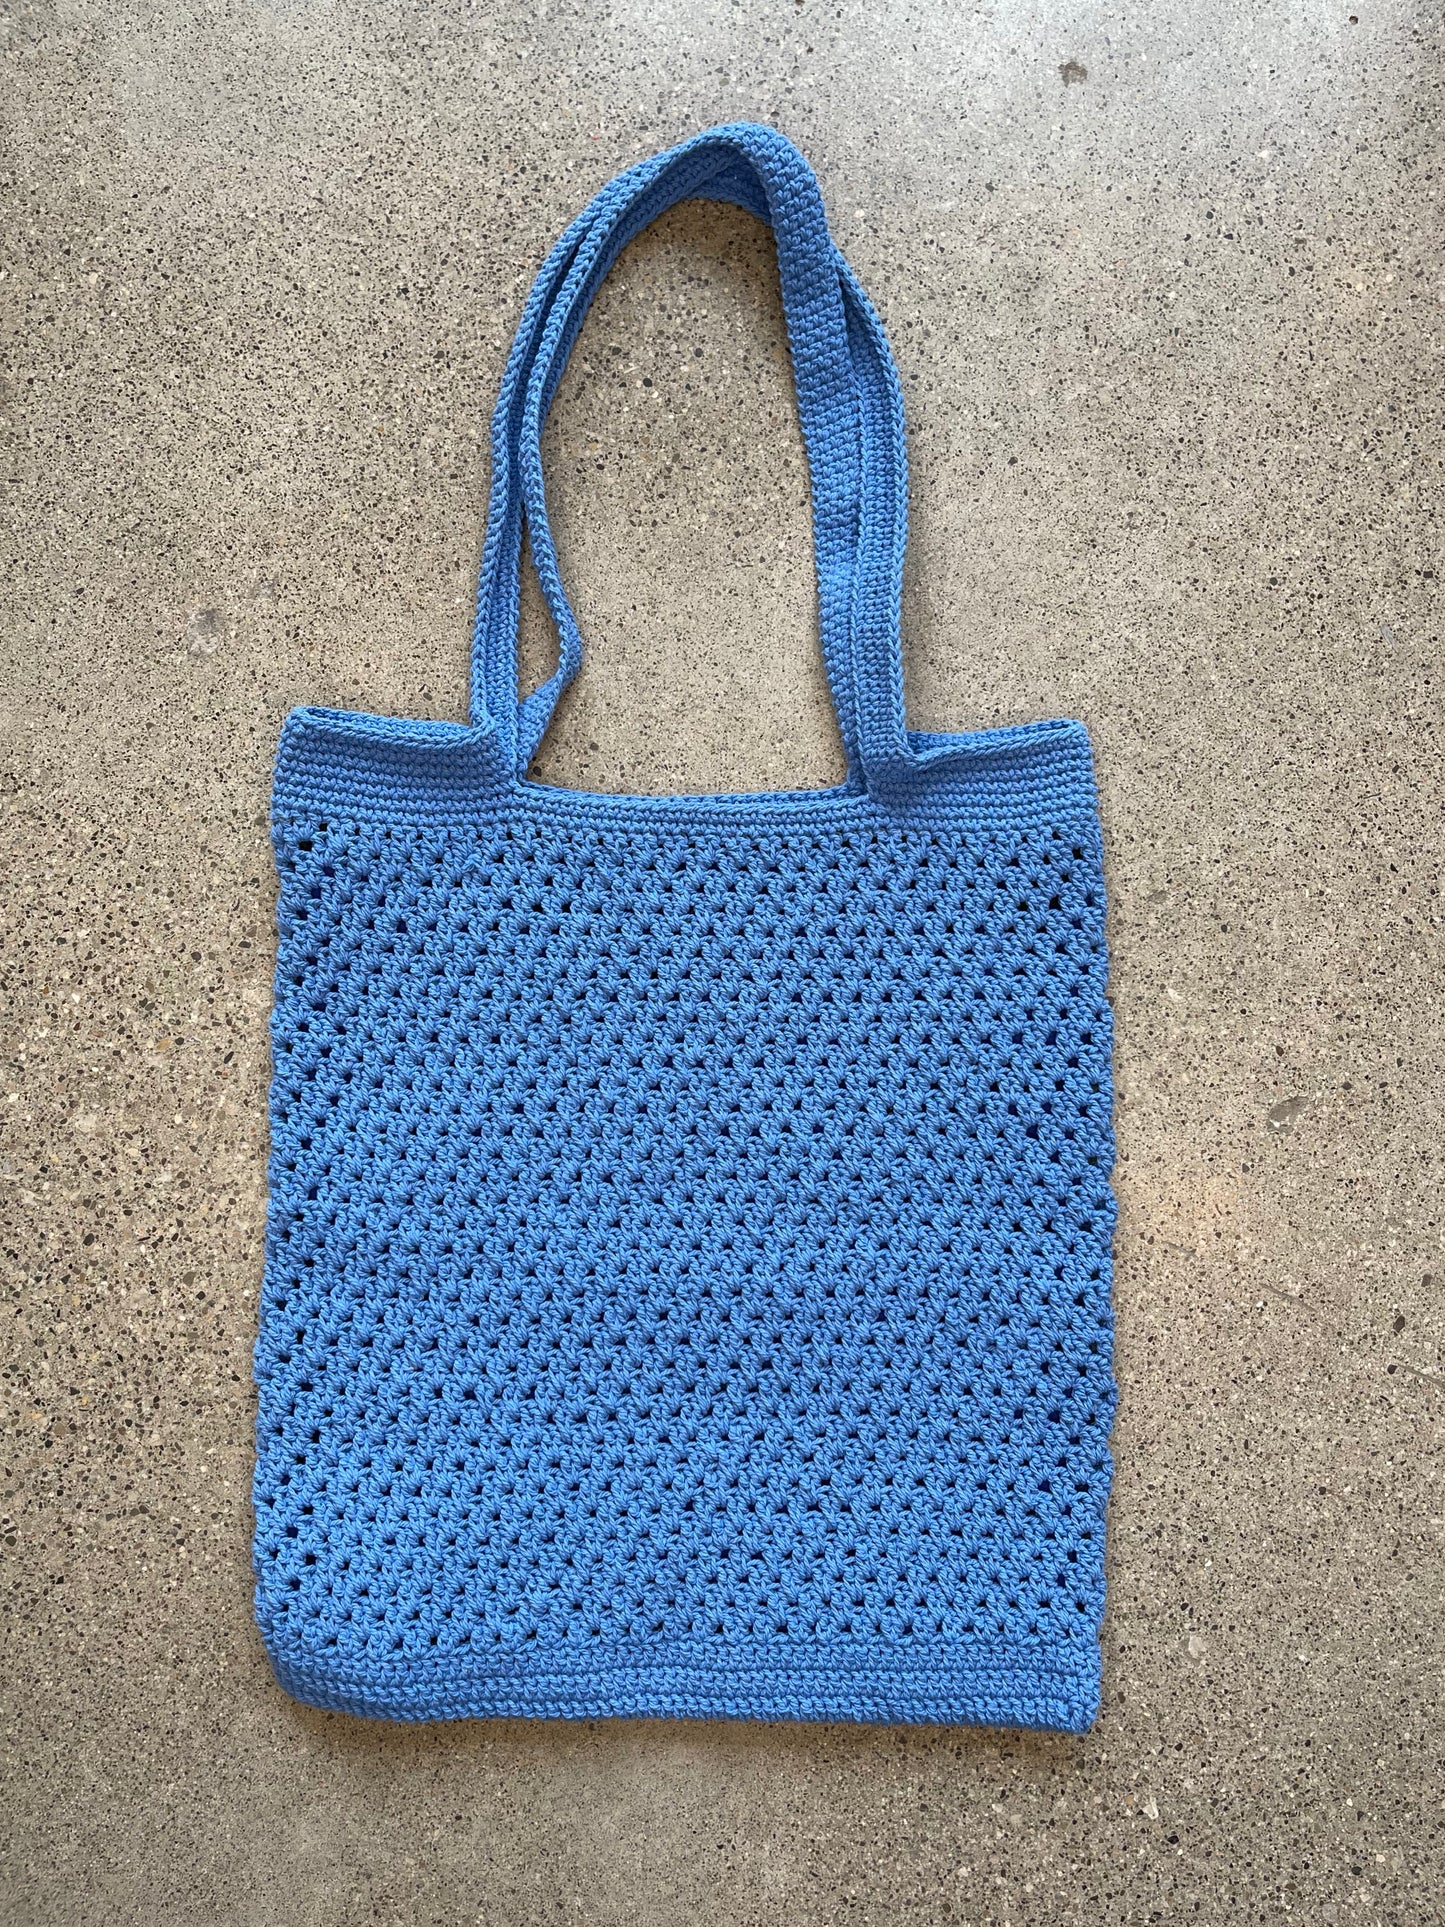 Blue Hand Knitted Tote Bag